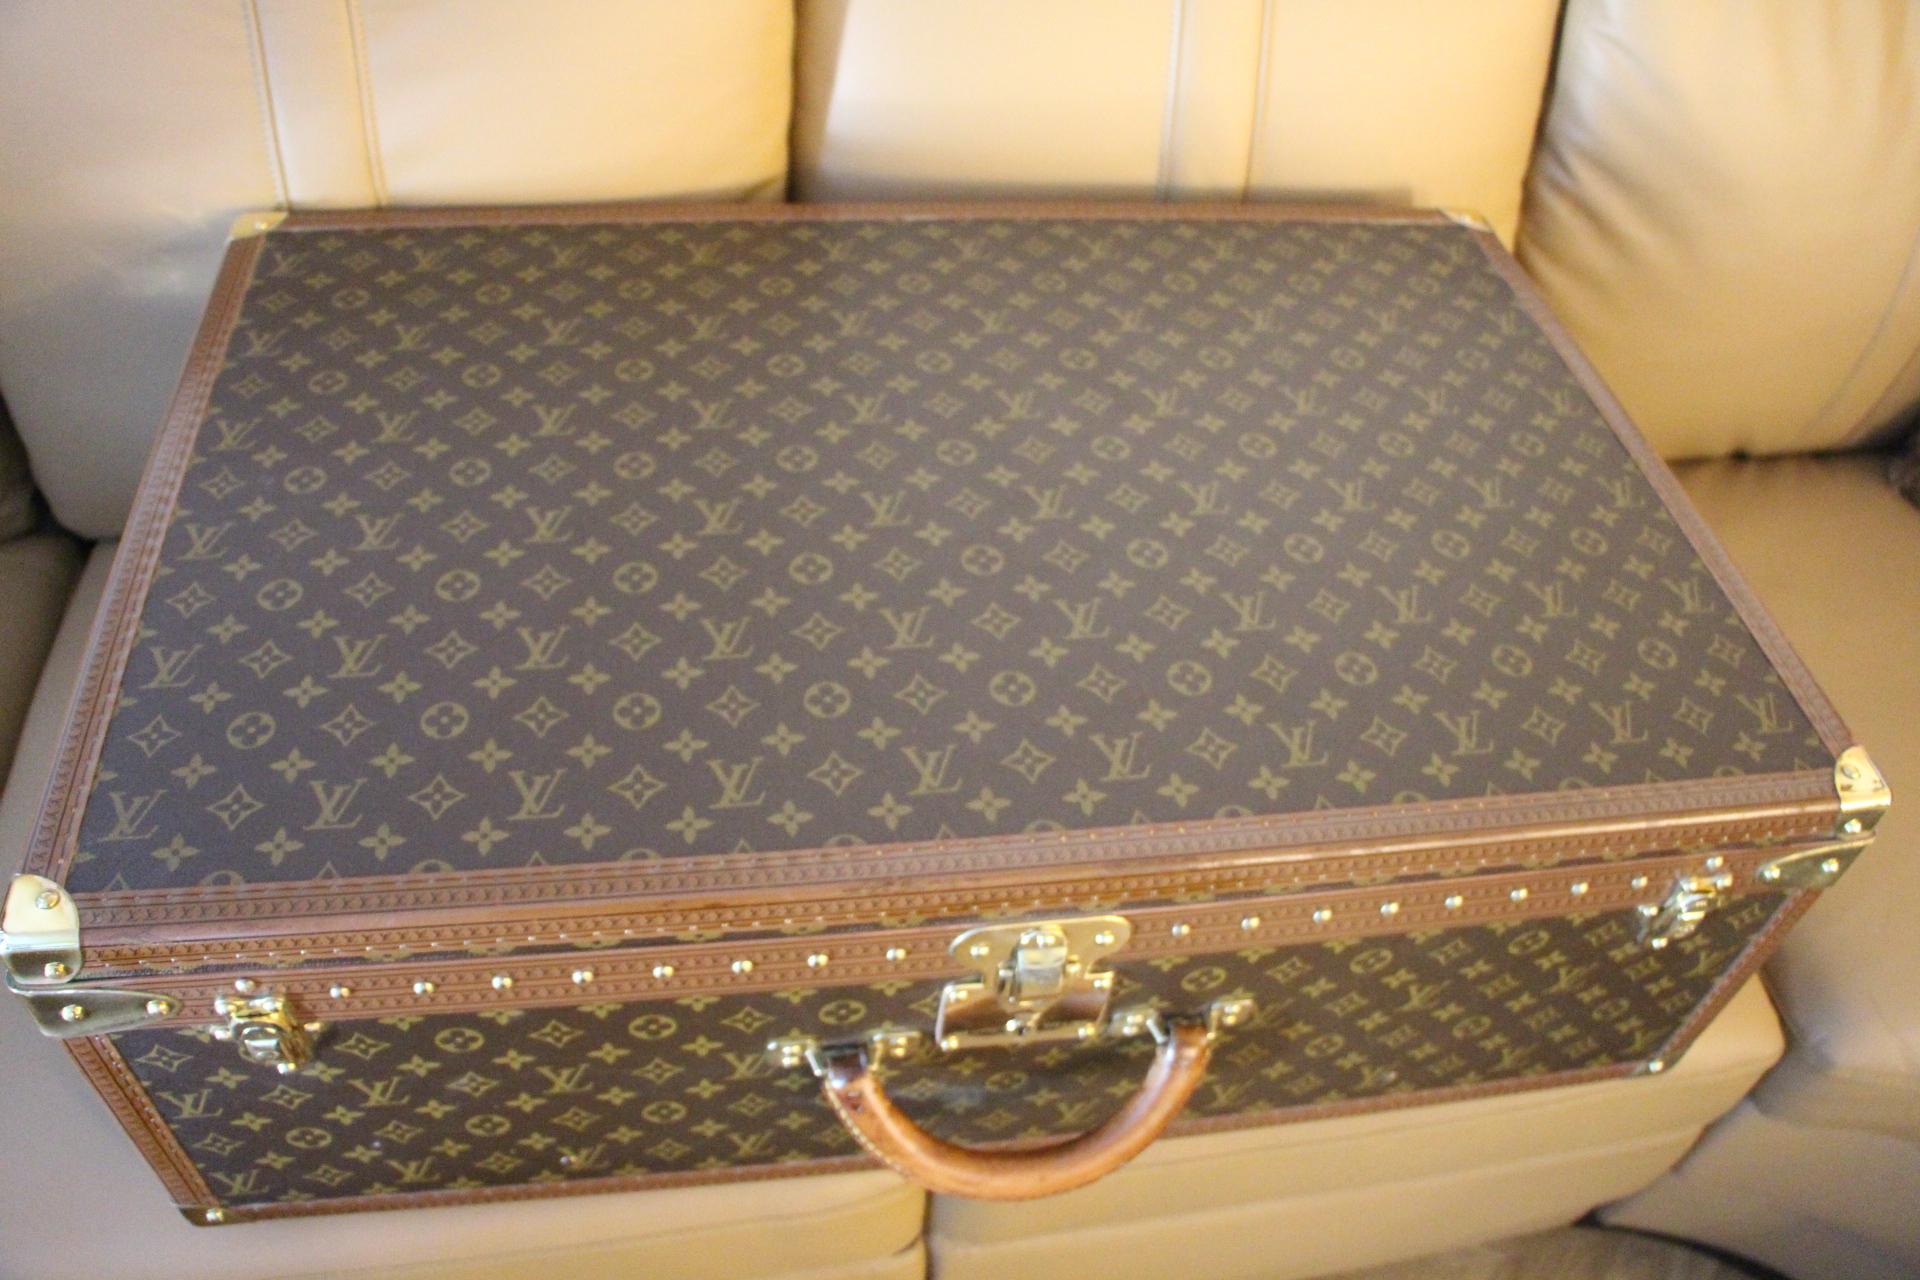 Magnificent Louis Vuitton Alzer monogramm suitcase. This 80 cm suitcase is the largest one made by Louis Vuitton.
All Louis Vuitton stamped solid brass fittings: lock, clasps and studs.
Very nice interior, fresh and clean,no smell,all original with